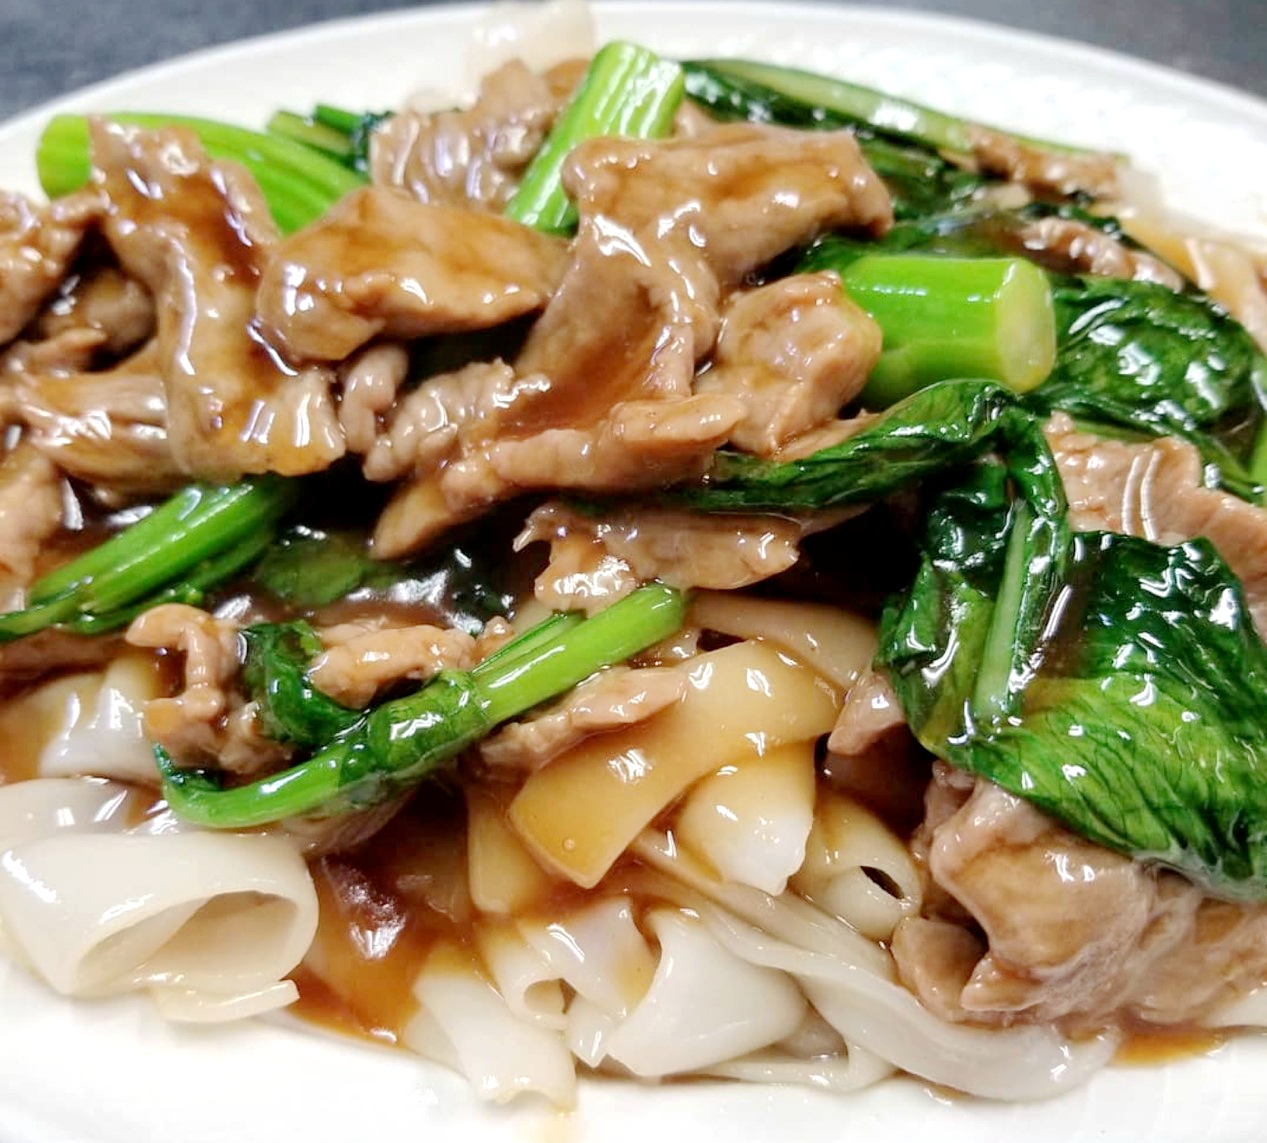 Hainan stir-fried rice noodles with sauce /Photo provided to CGTN